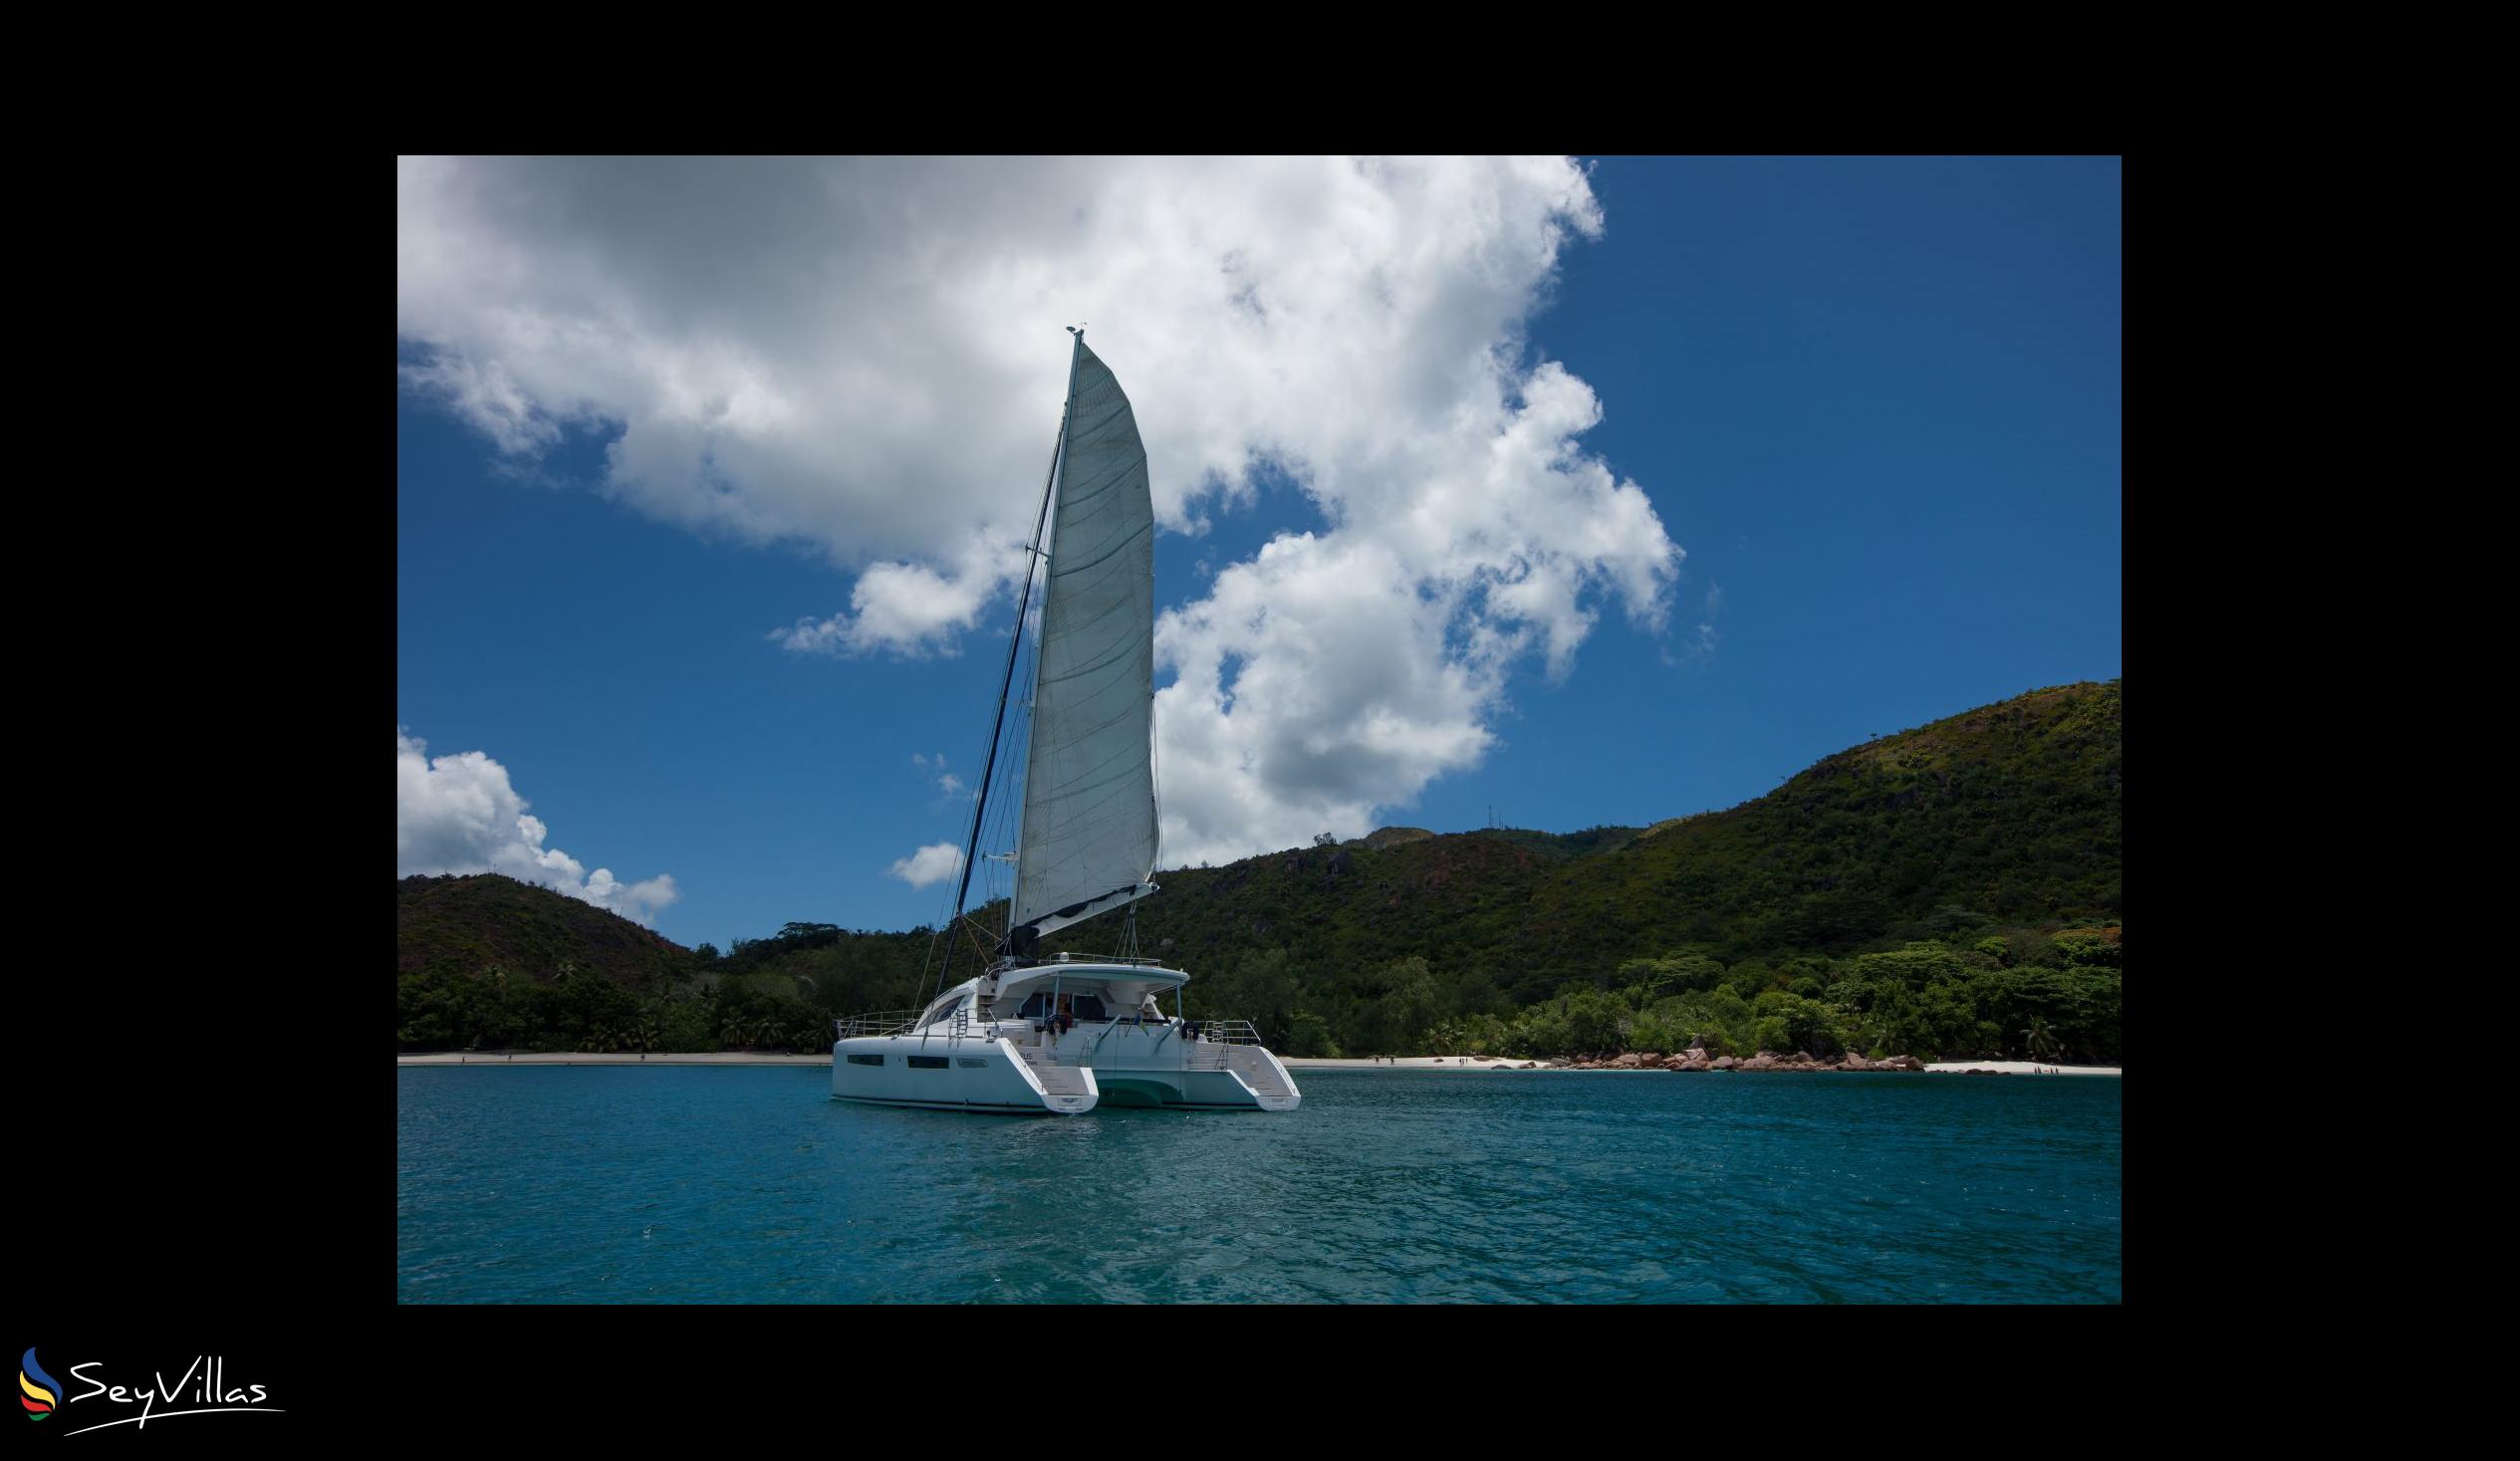 Foto 77: Seyscapes Yacht Charter - Charter Complet Cirrus - Seychelles (Seychelles)